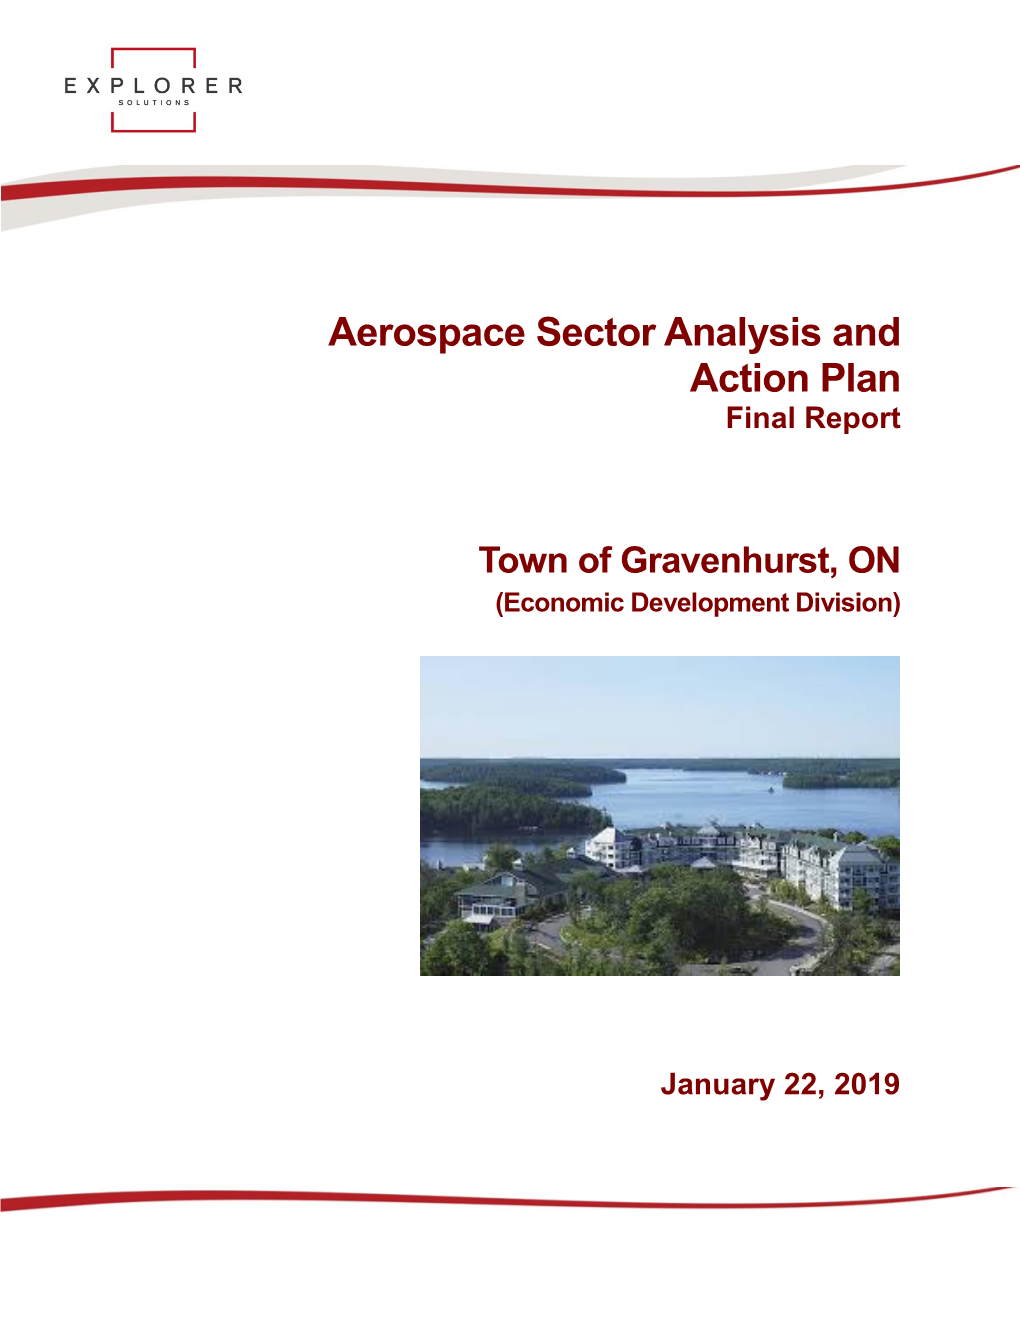 Aerospace Sector Analysis and Action Plan Final Report